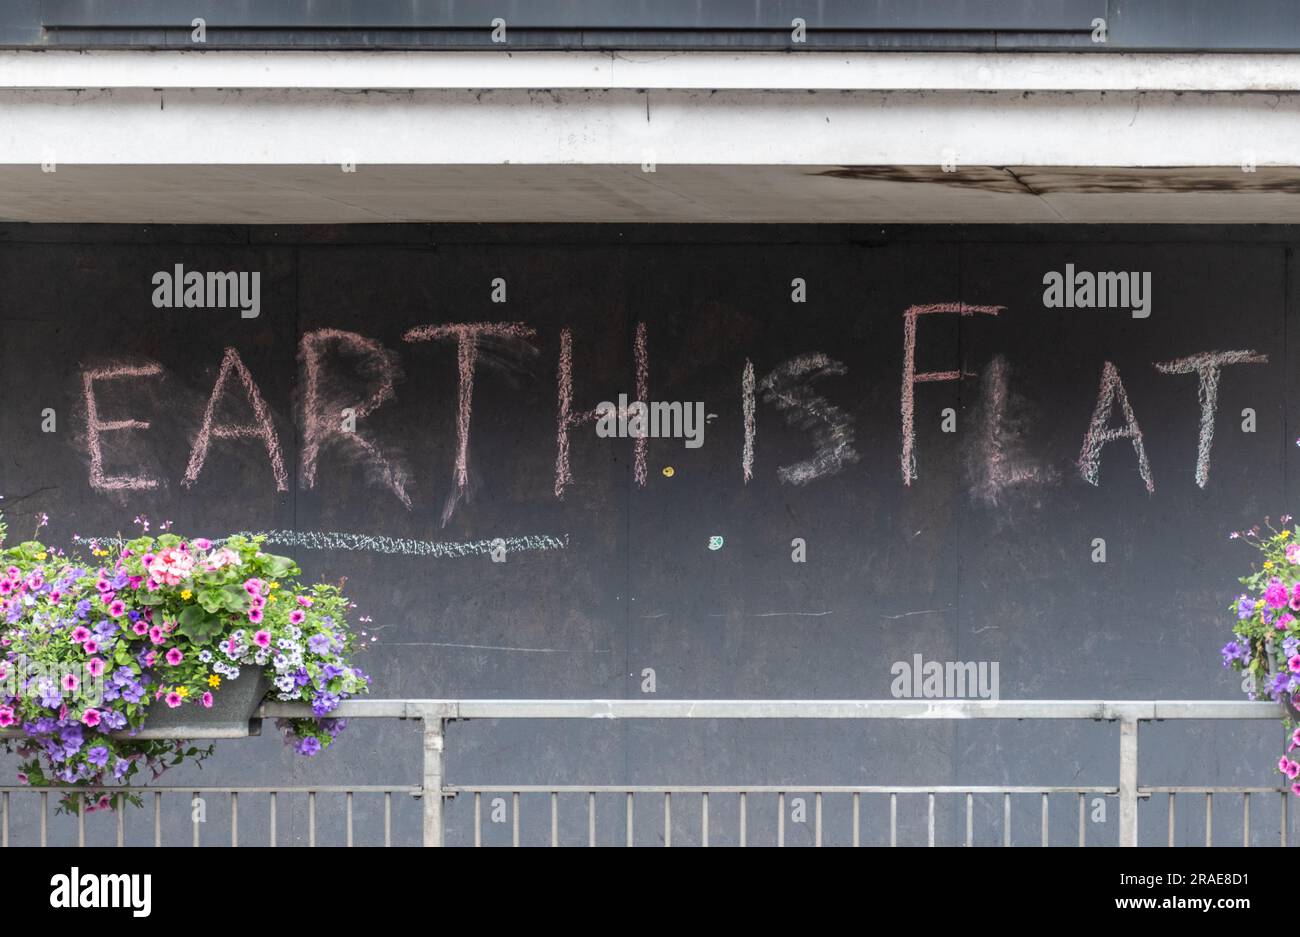 Earth is Flat graffiti on closed down shop, Royaume-Uni Banque D'Images